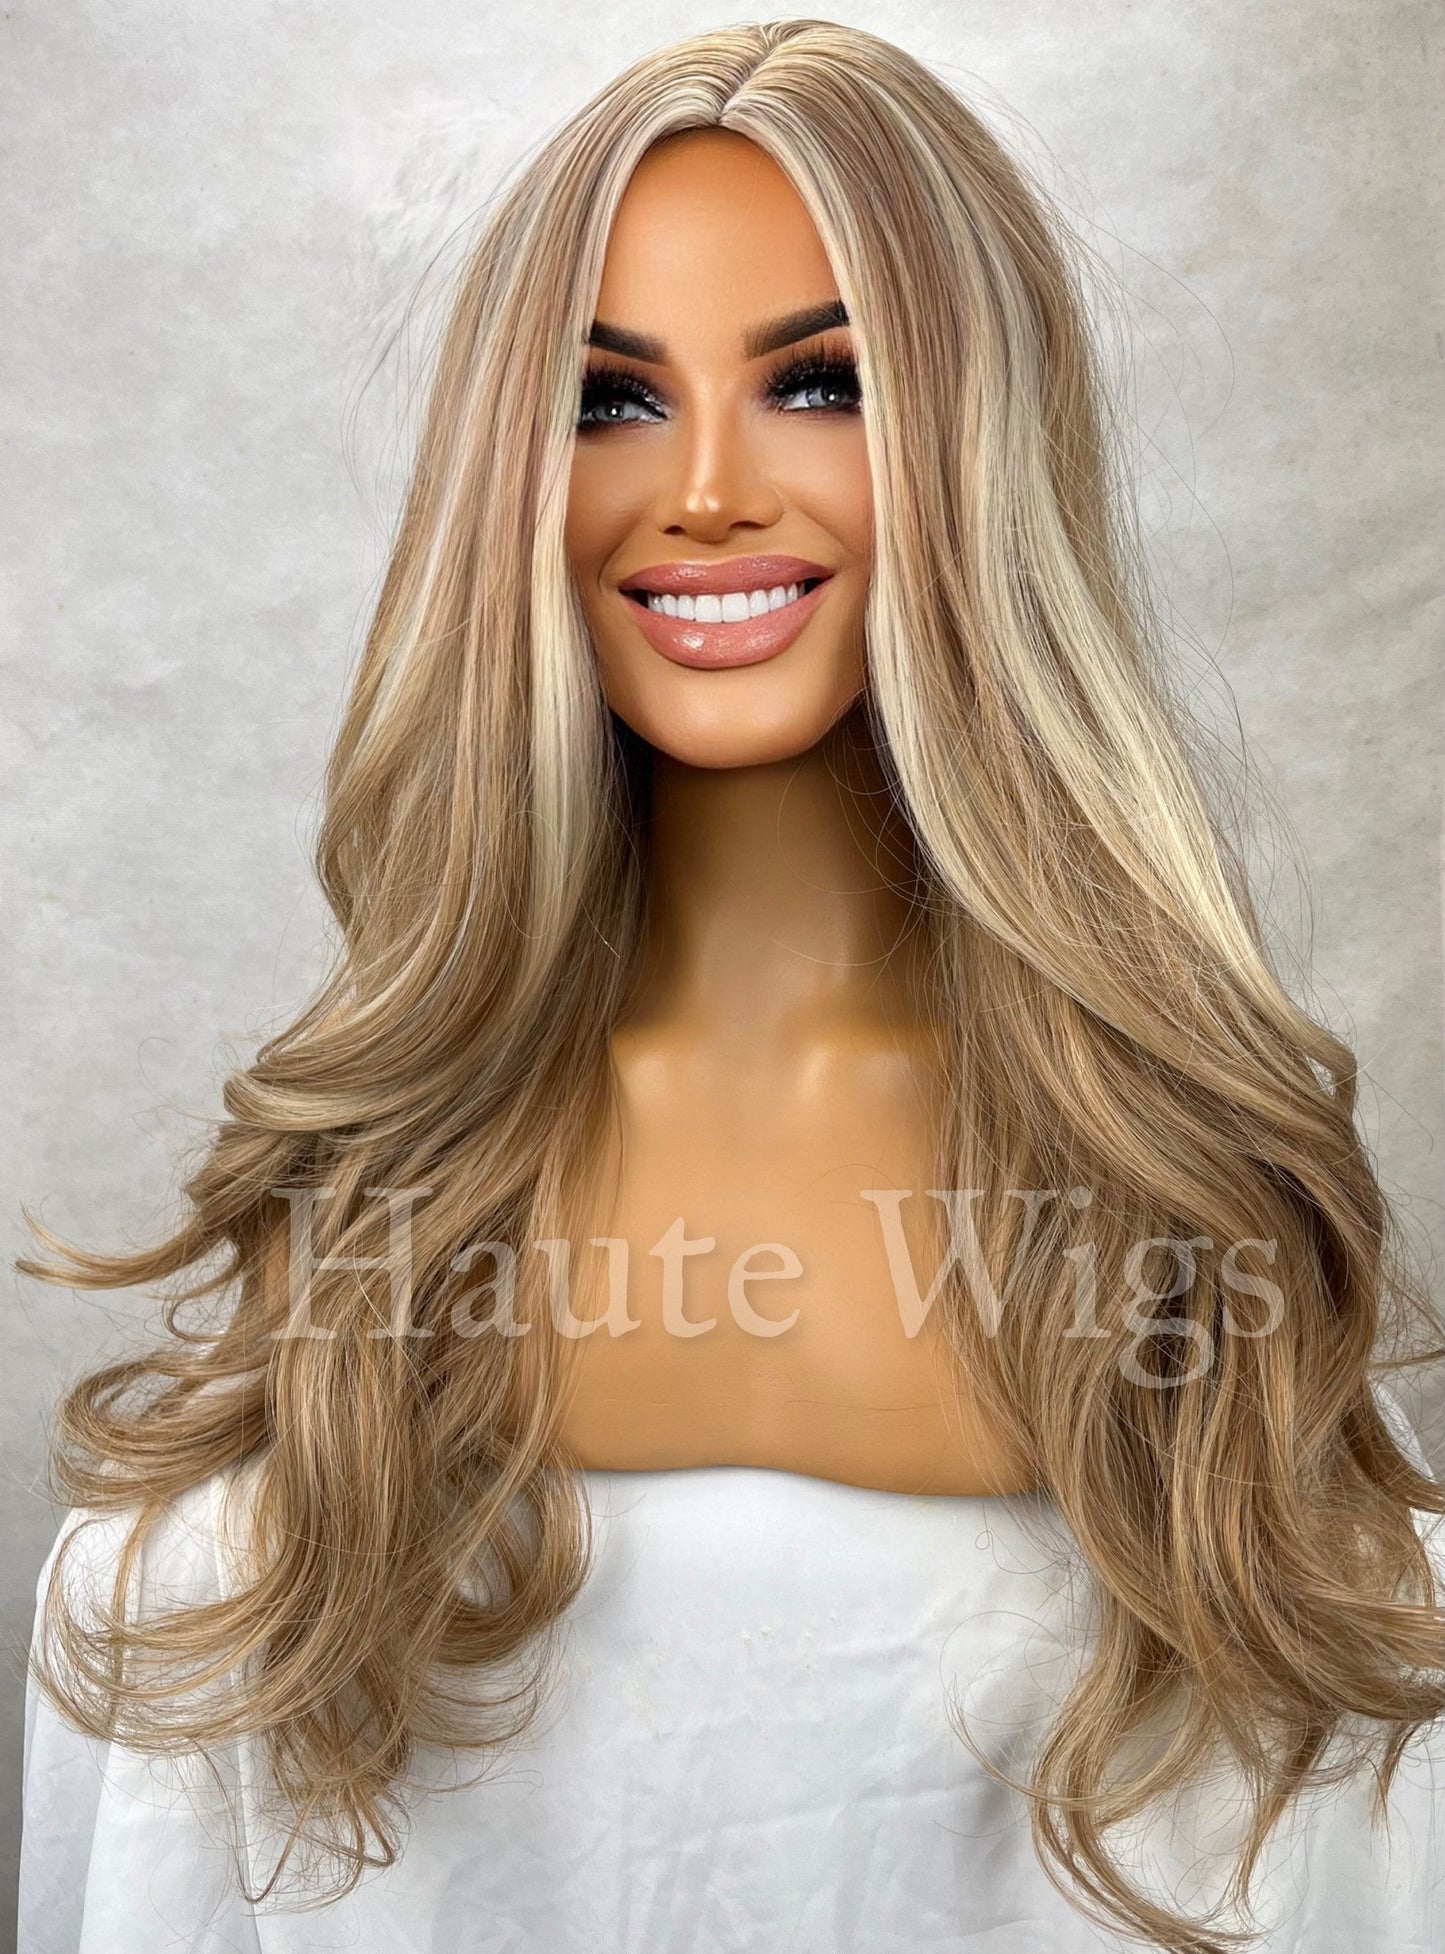 Venice Beach Honey Blonde Ash Highlights White Balayage streaks 22 Inch Long womens Wig Straight Center Parting NO Lace Front Gift for her